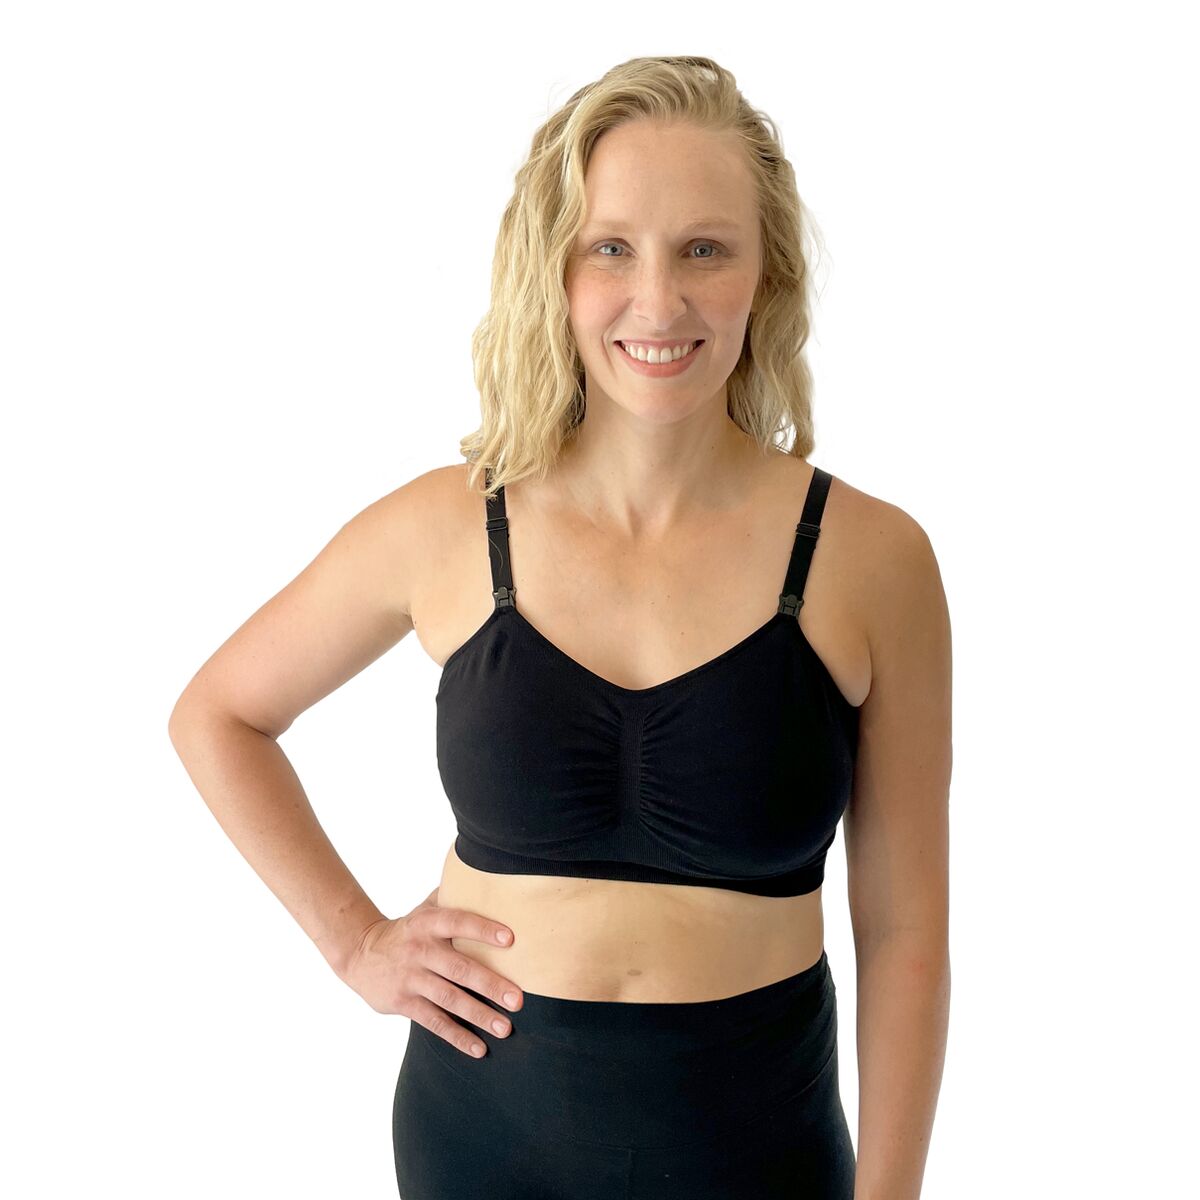 Pumping Nursing Bra - Easy Access Hands Free for Pumping